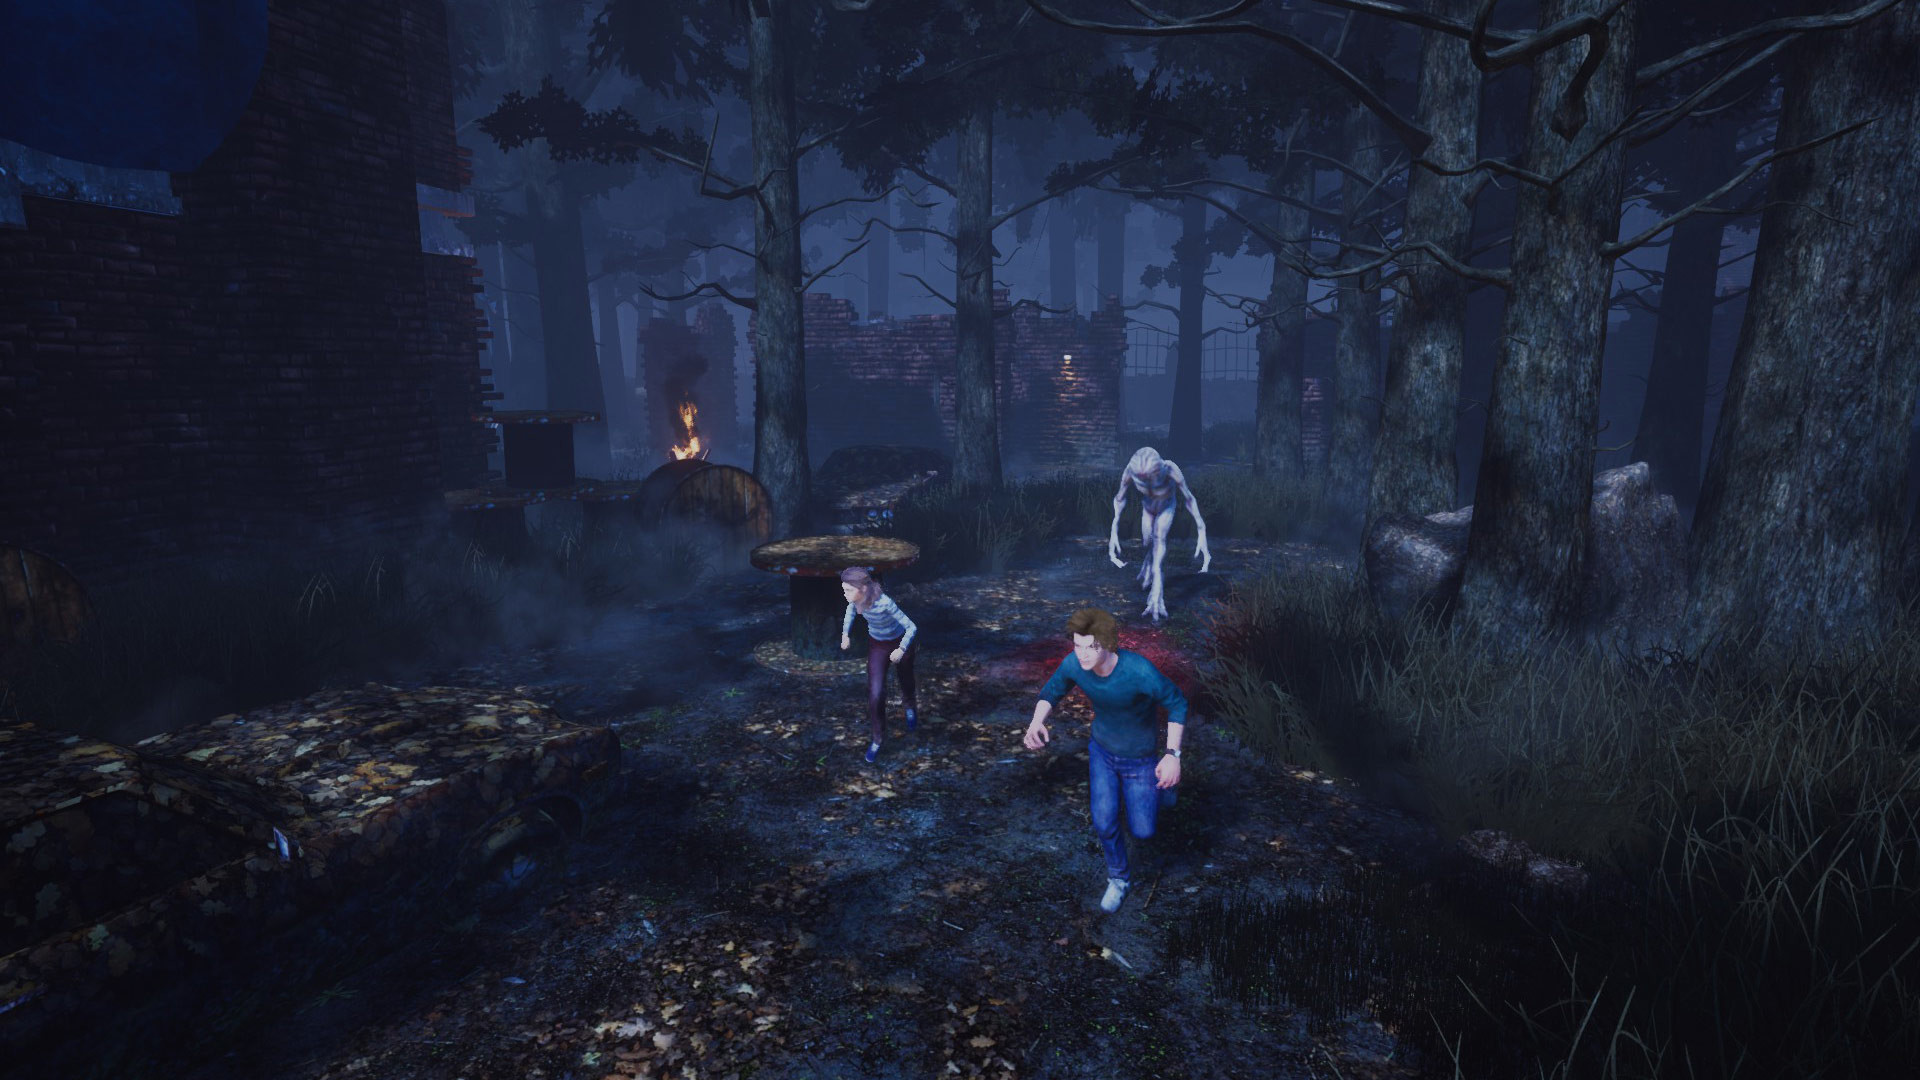 Dead by Daylight's Stranger Things content is coming back to the game